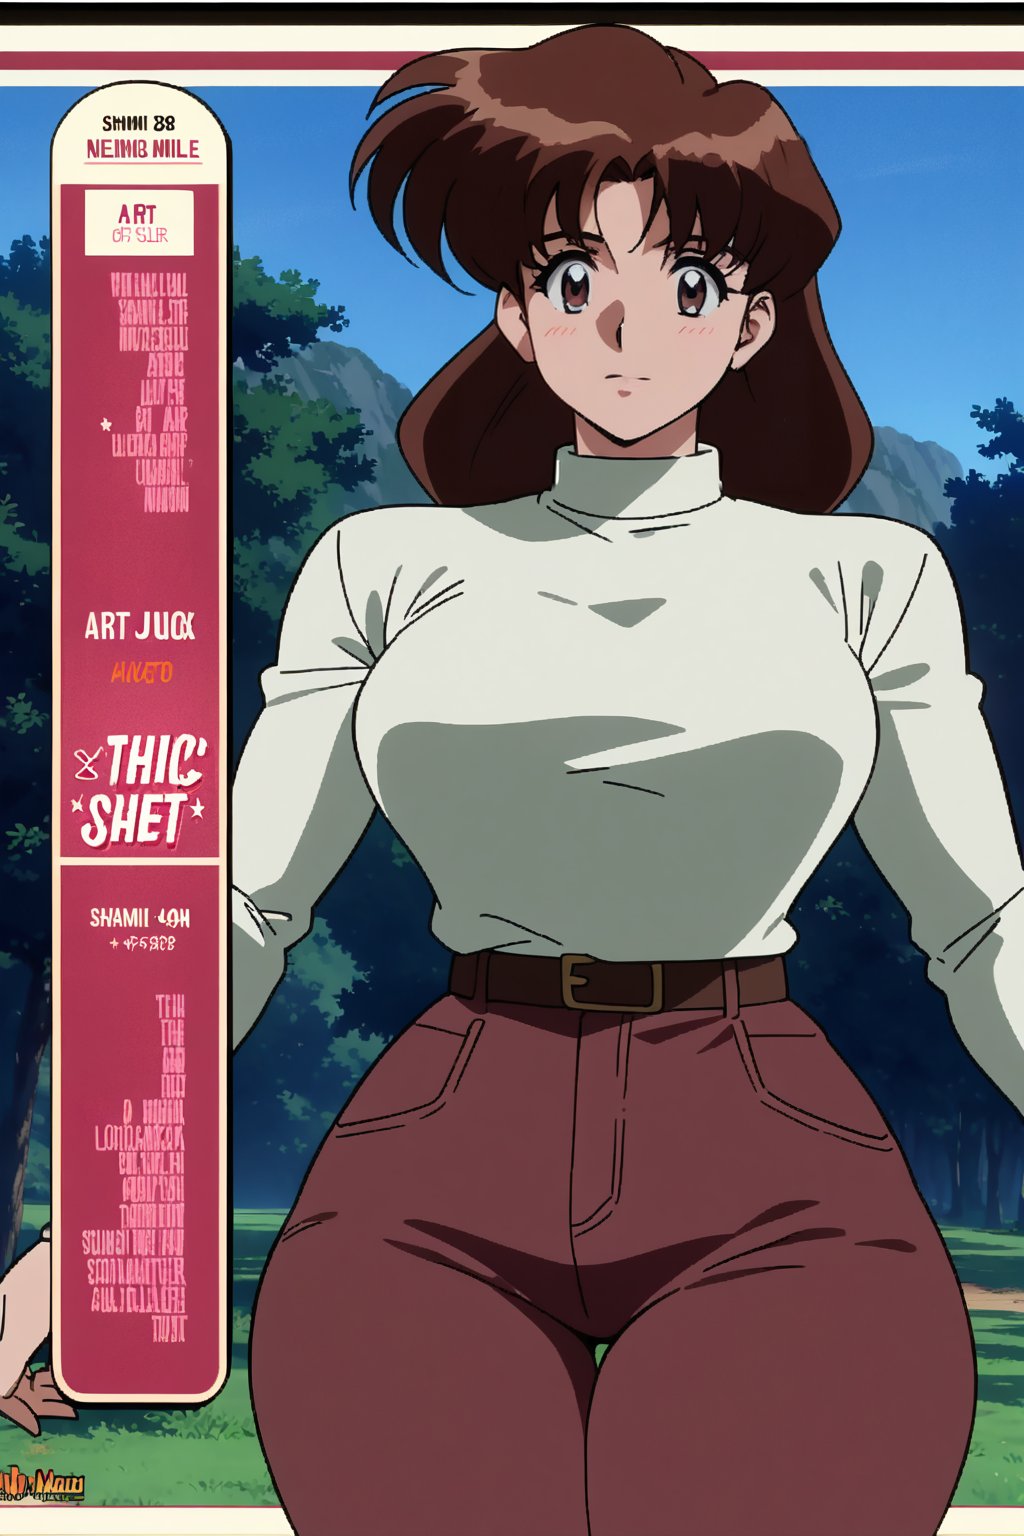 38 year old Milf Female, mature female, red long sleeves turtleneck shirt,tight brown trousers, grey boots, short neck curvy bang brown hair, brown eyes, curvy wide hips, Thicc Juicy Big Butt, 40 inches butt, character_sheet, looking-at-viewer, masterpiece, best quality, detailed face, HD detailed, high_resolution, Shinji_Nishikawa_Artstyle, Shoujo_Anime,90s Aesthetic,Shami